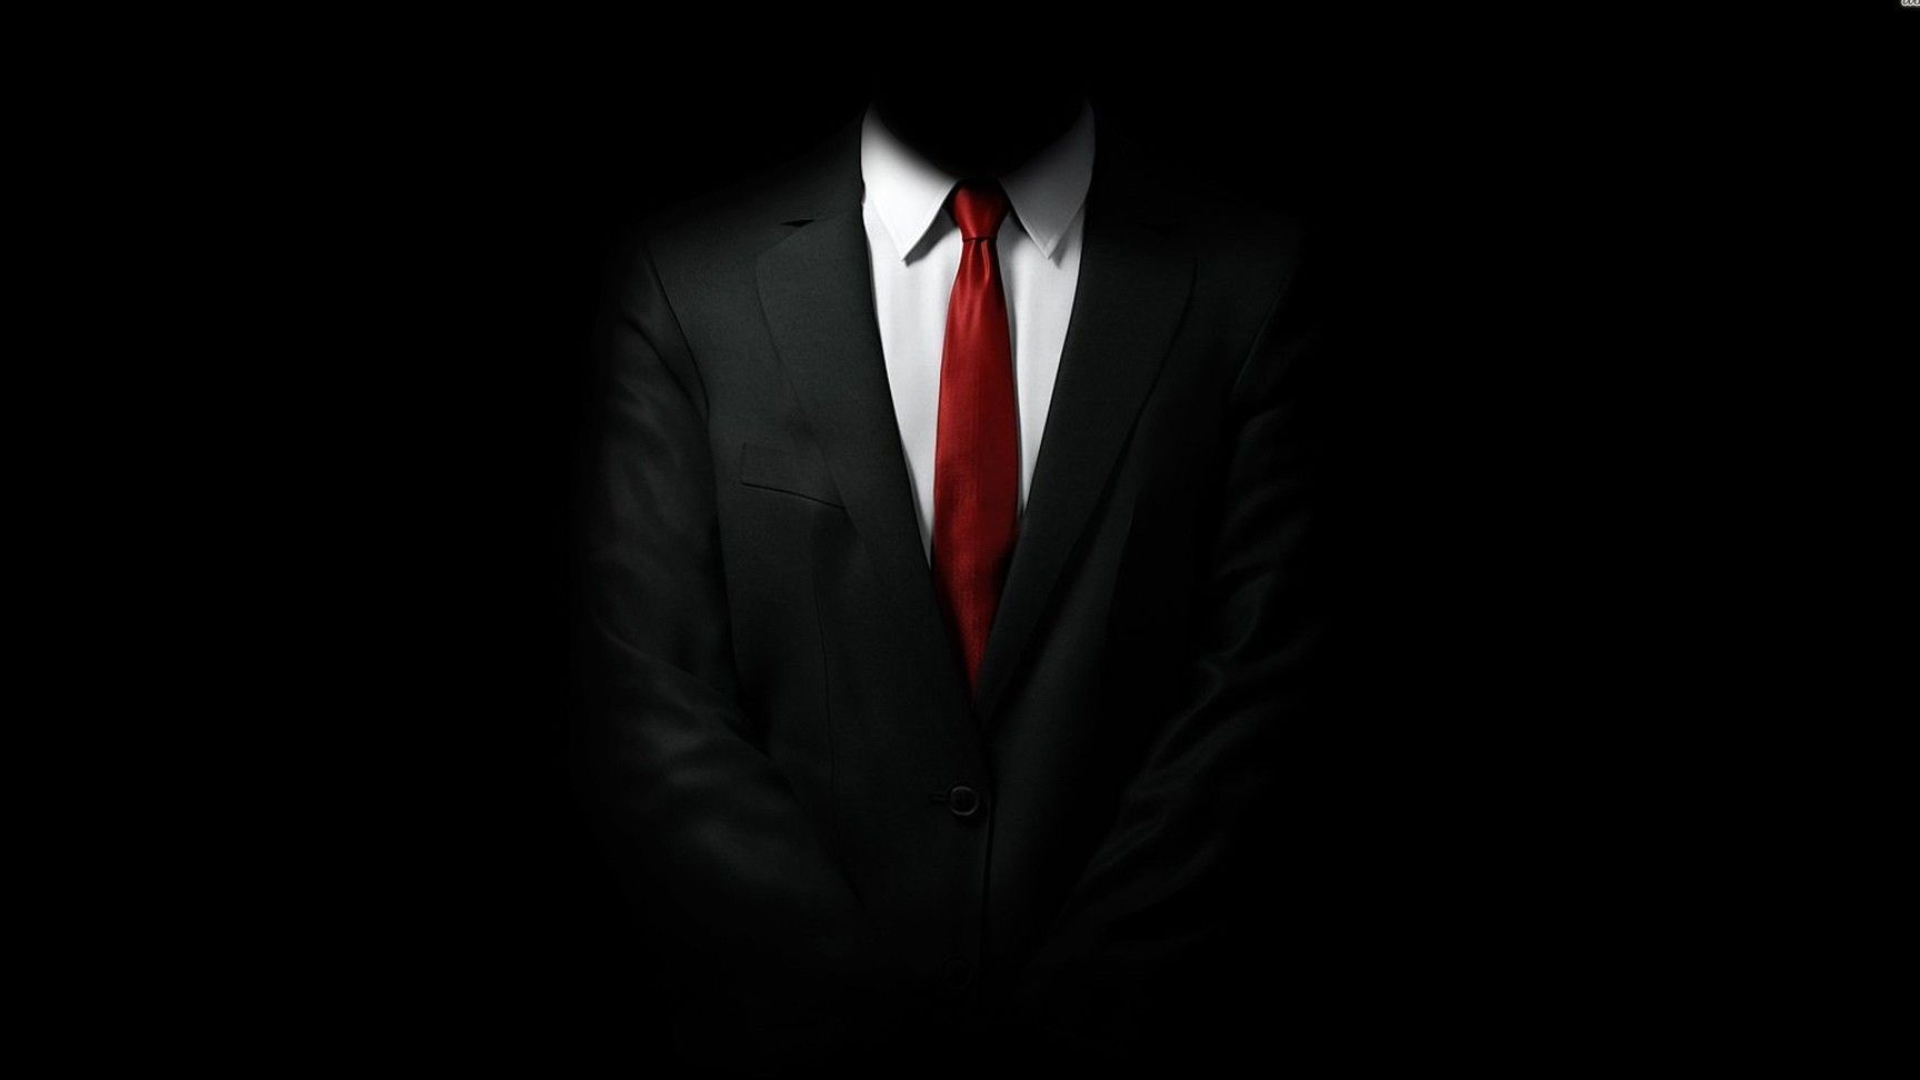 Hitman wallpapers, Stylish suits, Red tie aesthetic, Sophisticated visuals, 1920x1080 Full HD Desktop